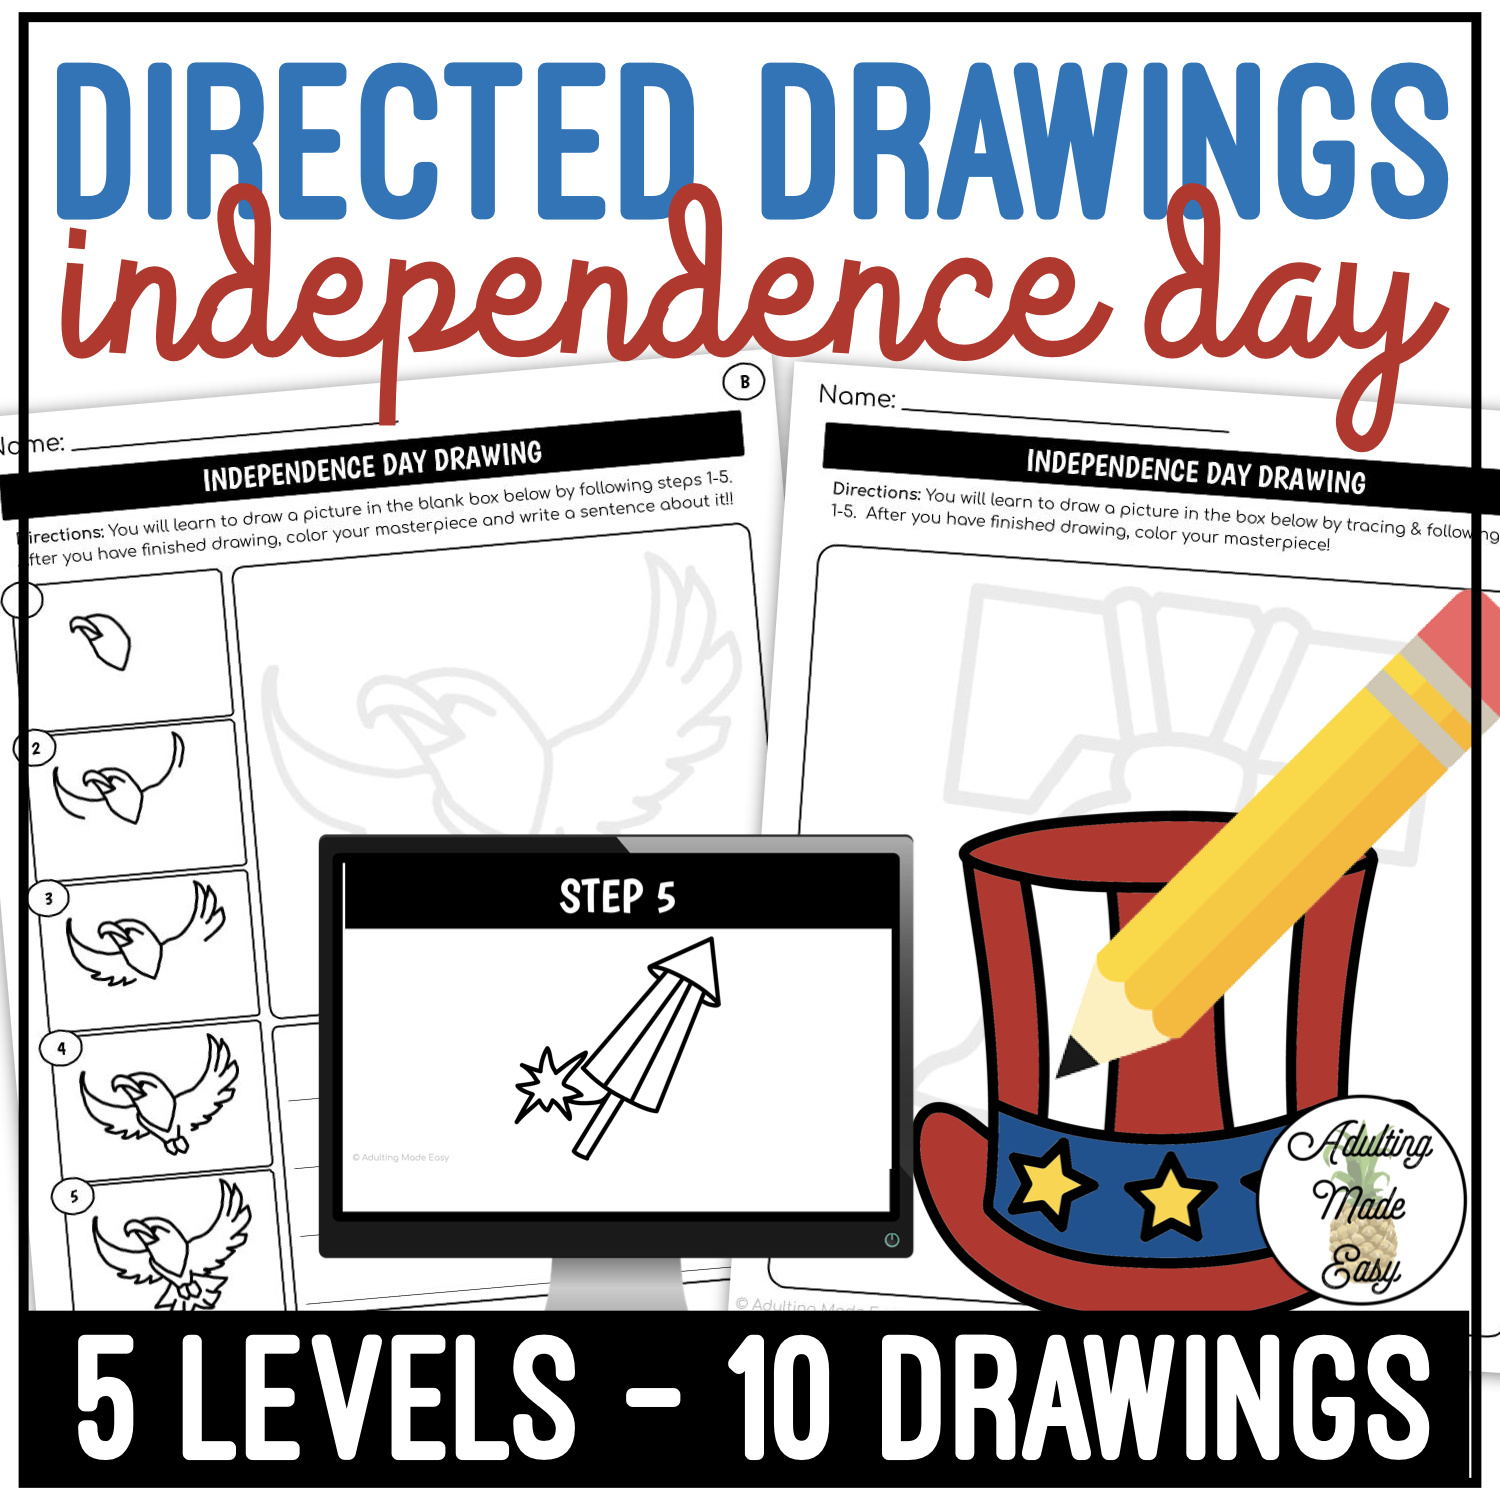 How to Draw Simple Independence Day Special Image by mlspcart on DeviantArt